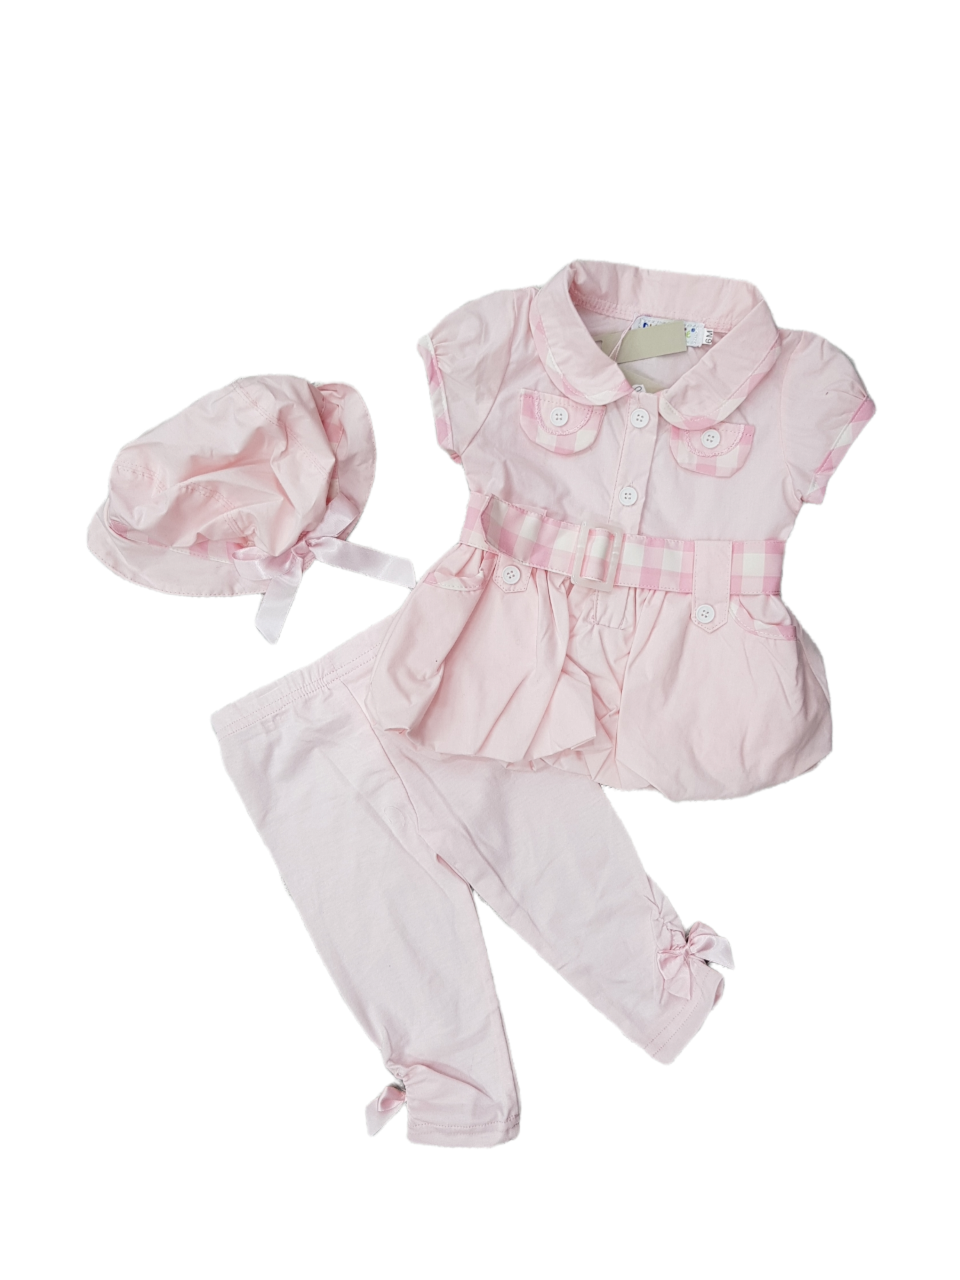 Baby Girls Summer 3pc Pink Outfit